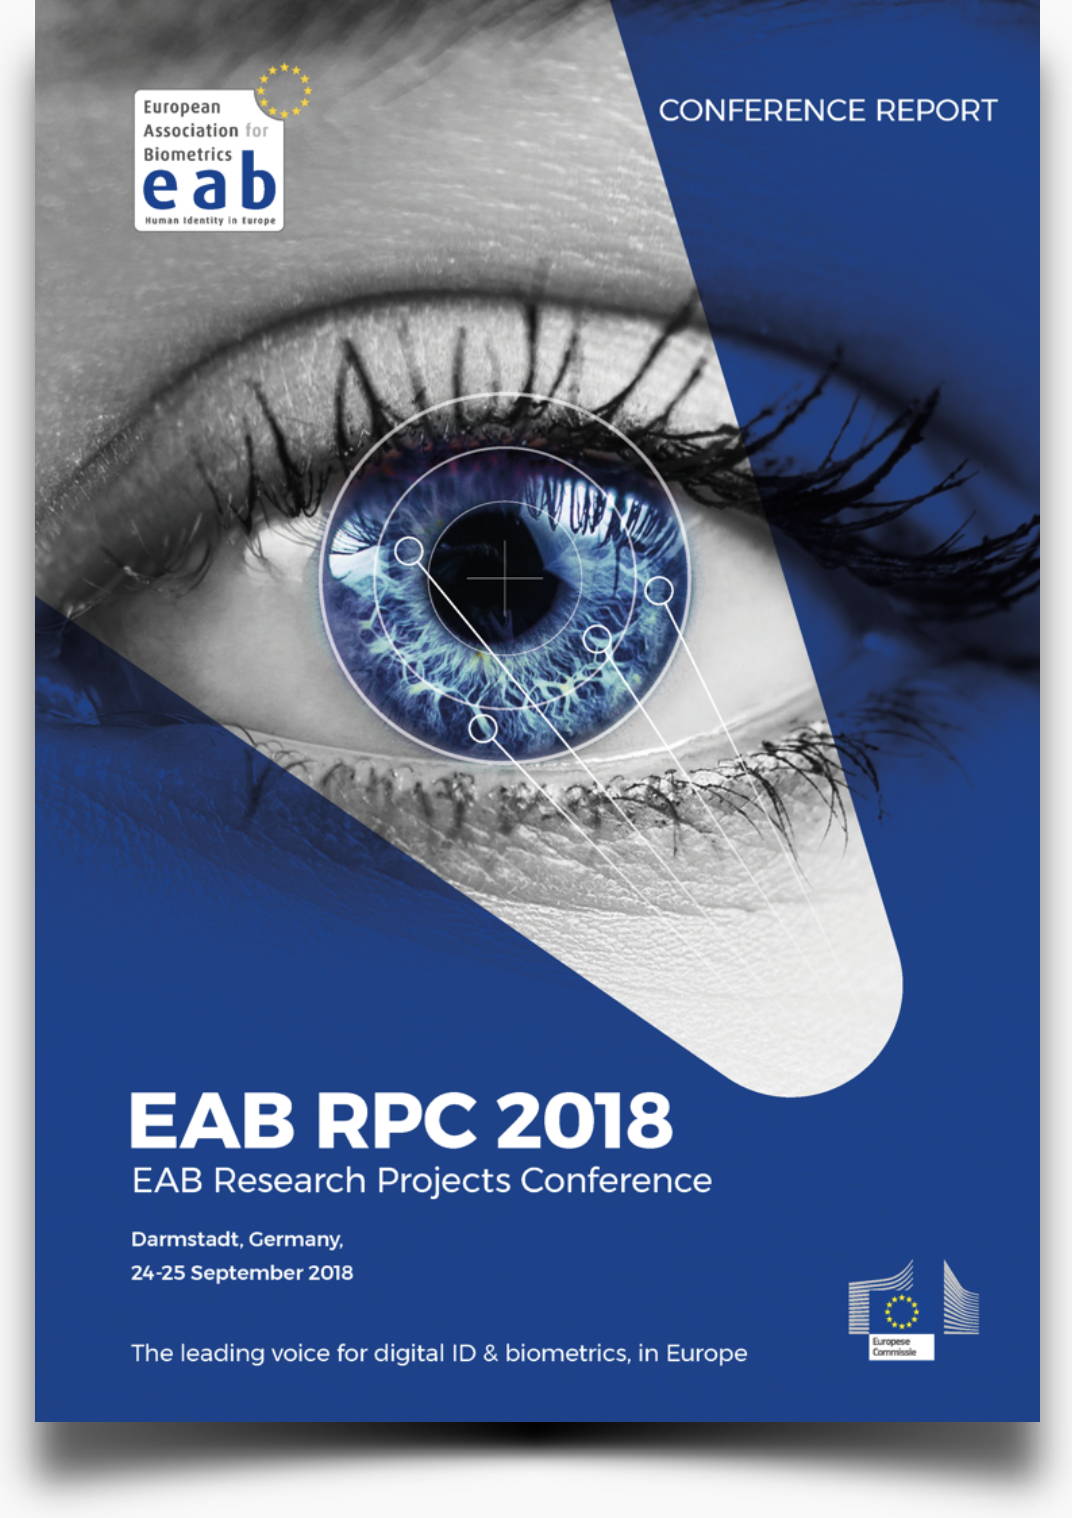 [Banner] EAB-RPC 2018 Conference Report